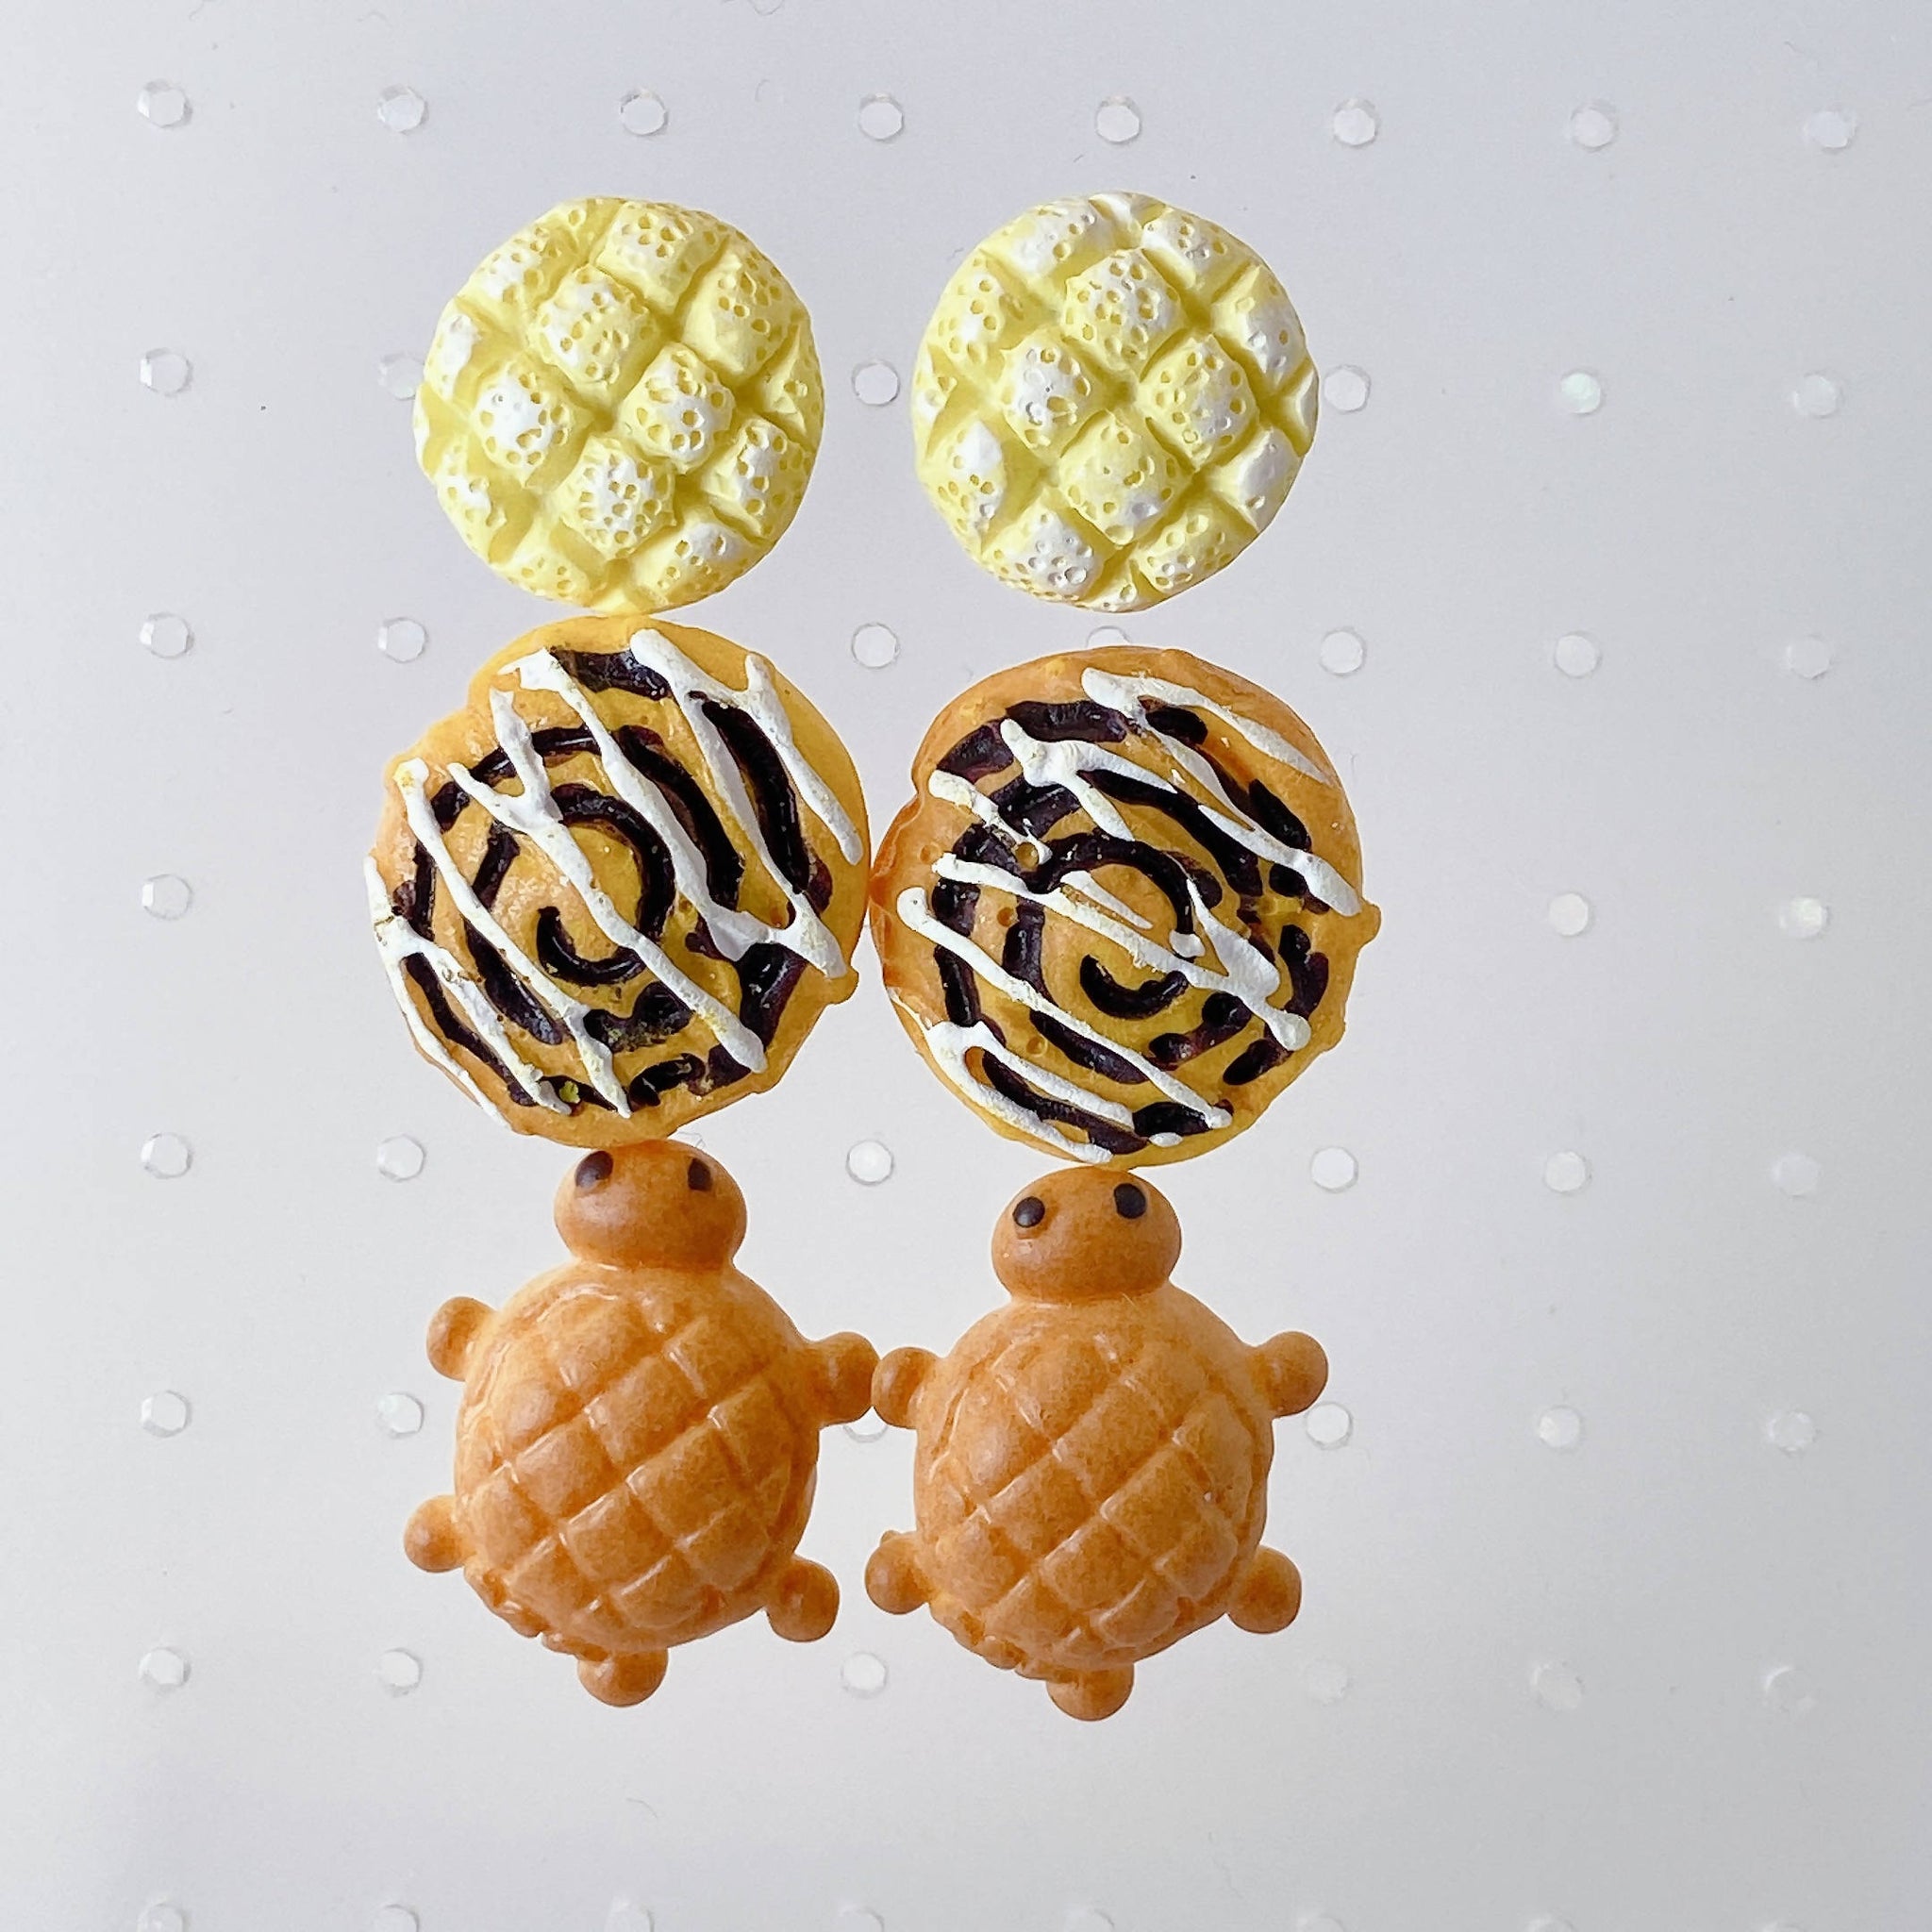 Baked Goods Earrings (3 Colors) - Lolita Collective